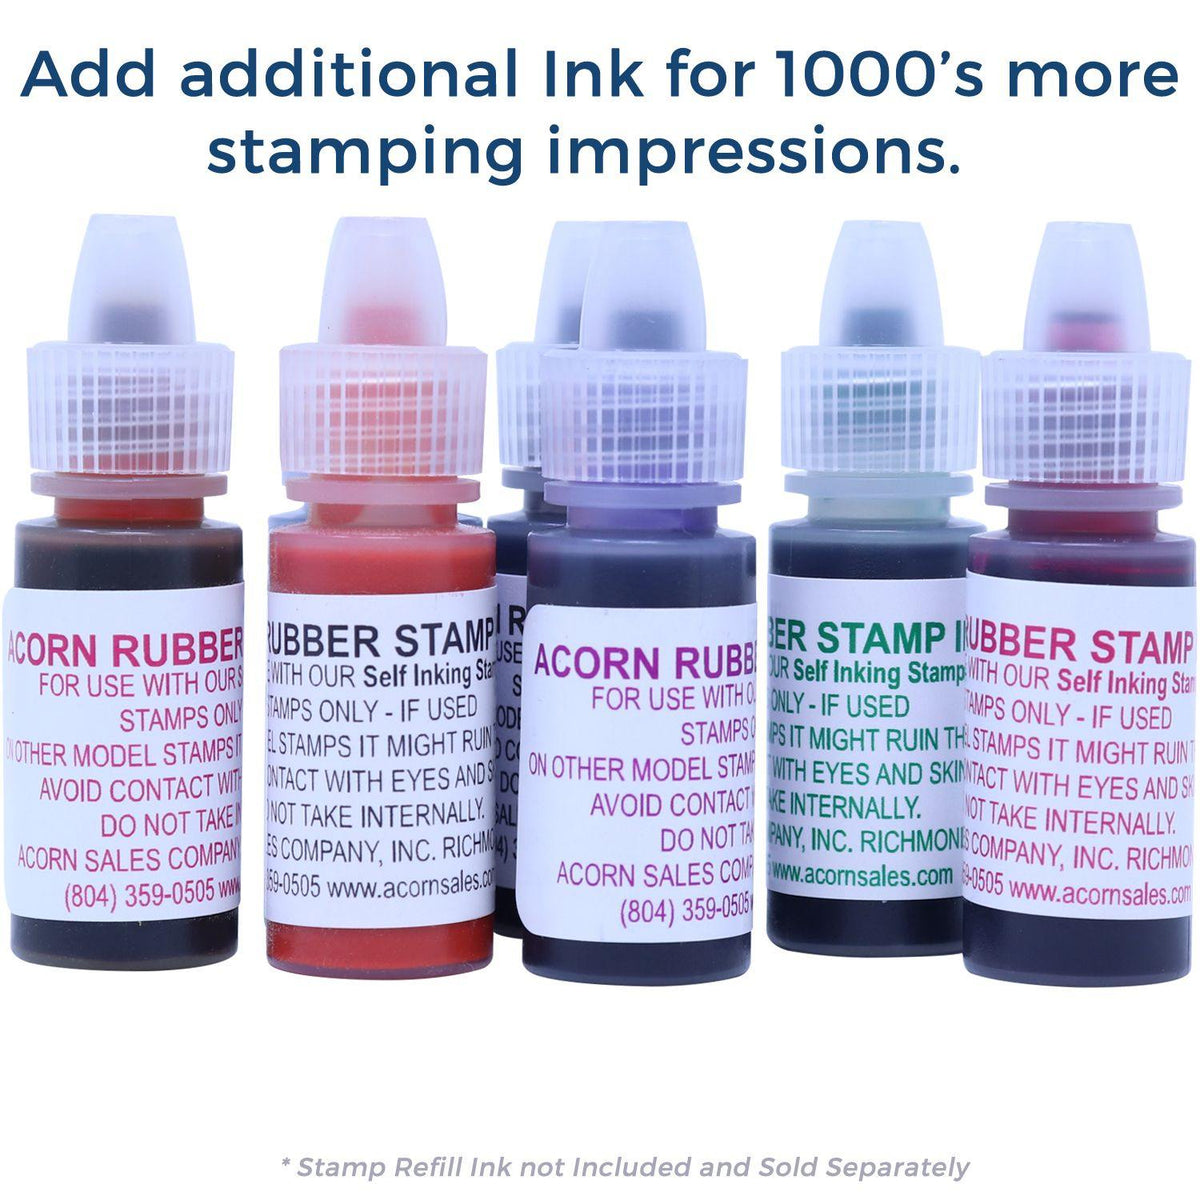 Refill Inks for Large Pre-Inked Confidential with Envelope Stamp Available